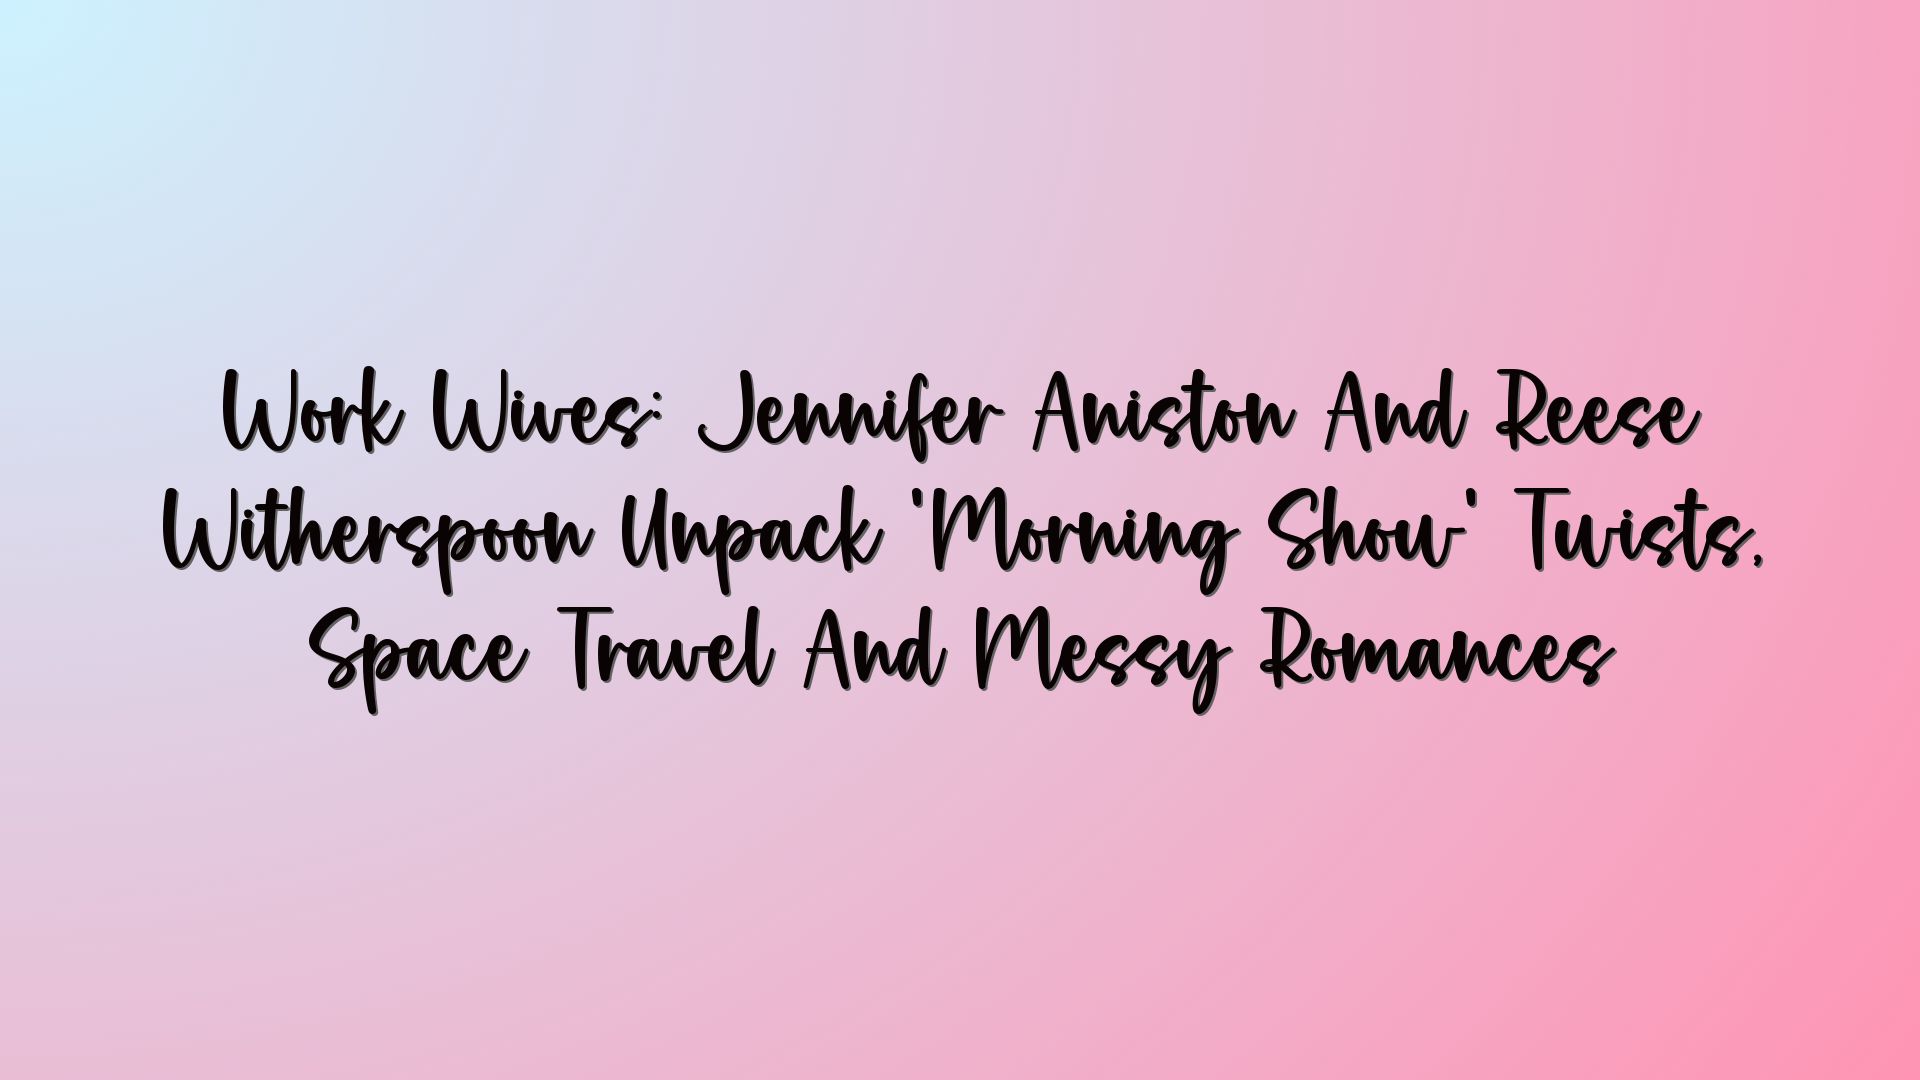 Work Wives: Jennifer Aniston And Reese Witherspoon Unpack ‘Morning Show’ Twists, Space Travel And Messy Romances